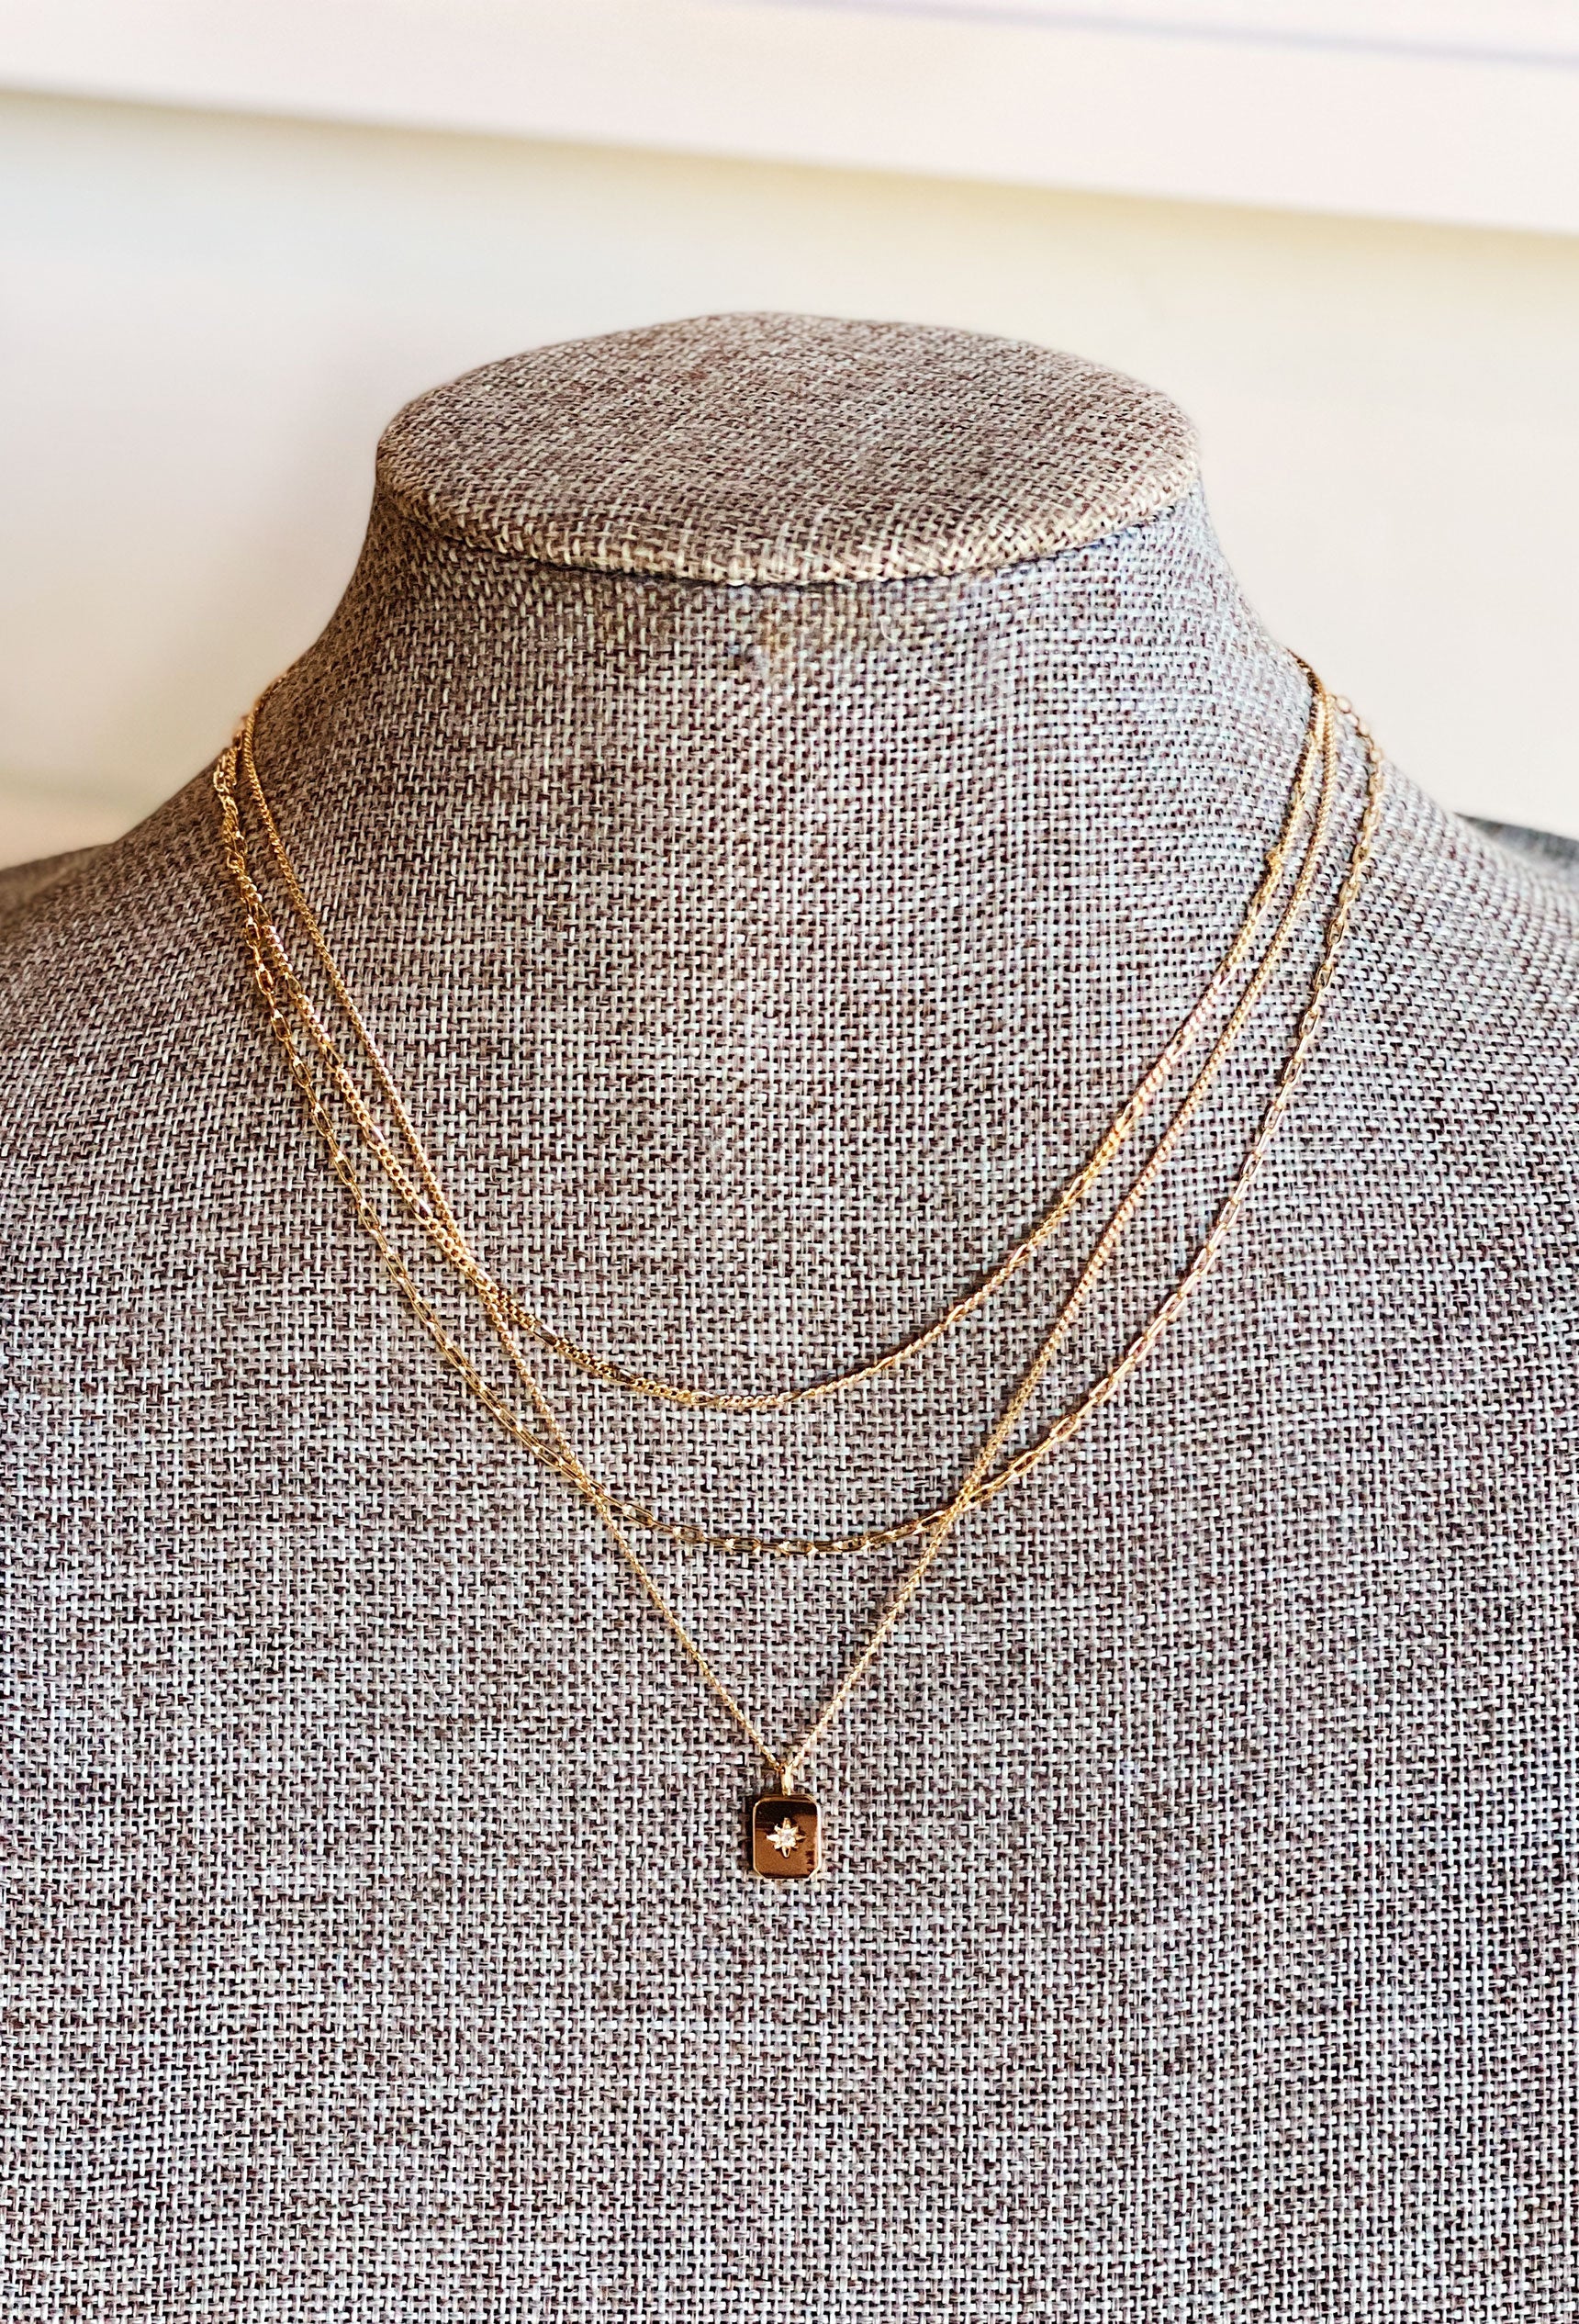 Gold Circle & Crystal Layered Necklace, Groovy's, Chain Link